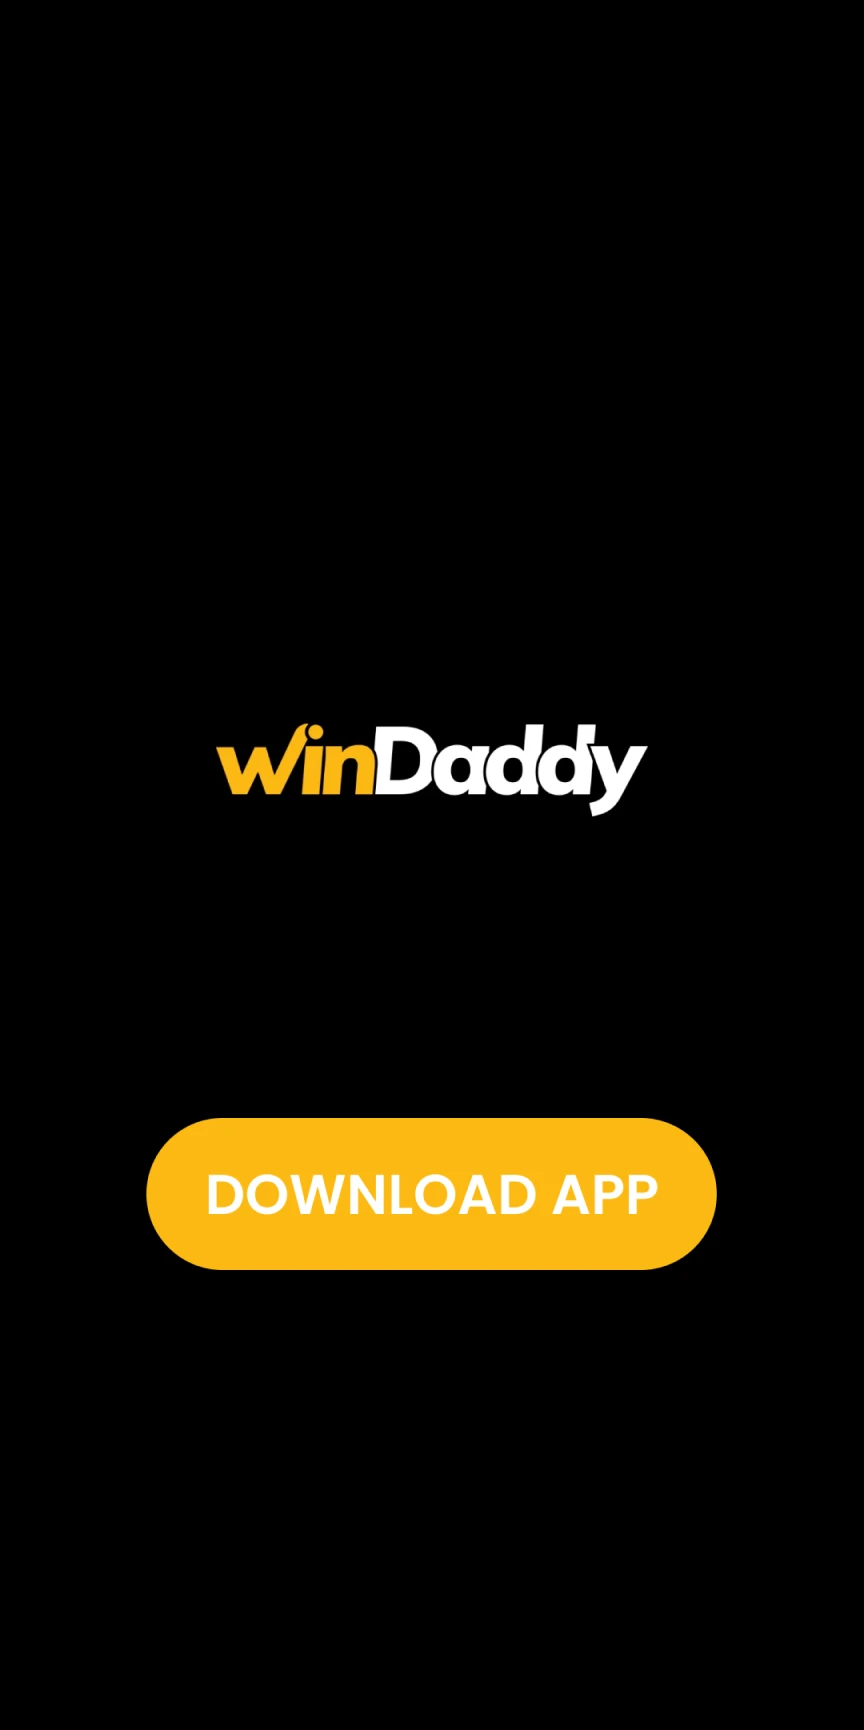 Download the WinDaddy app for iOS.